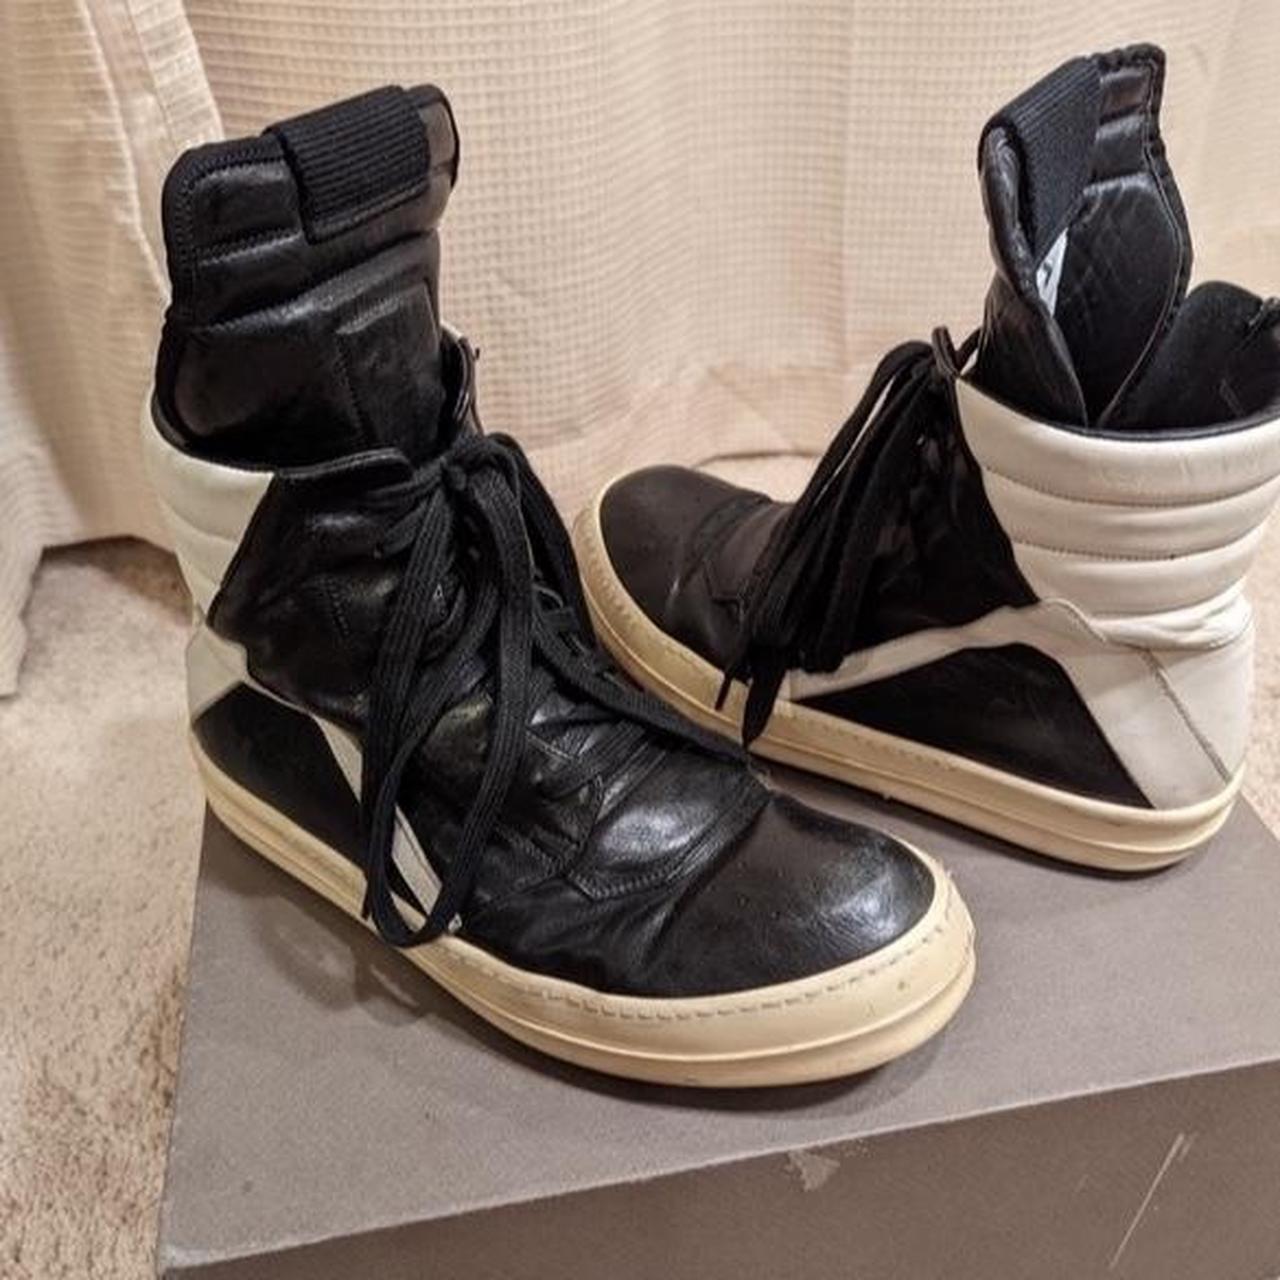 RICK OWENS GEOBASKET , size 42 or a 9 us, COMES WITH...